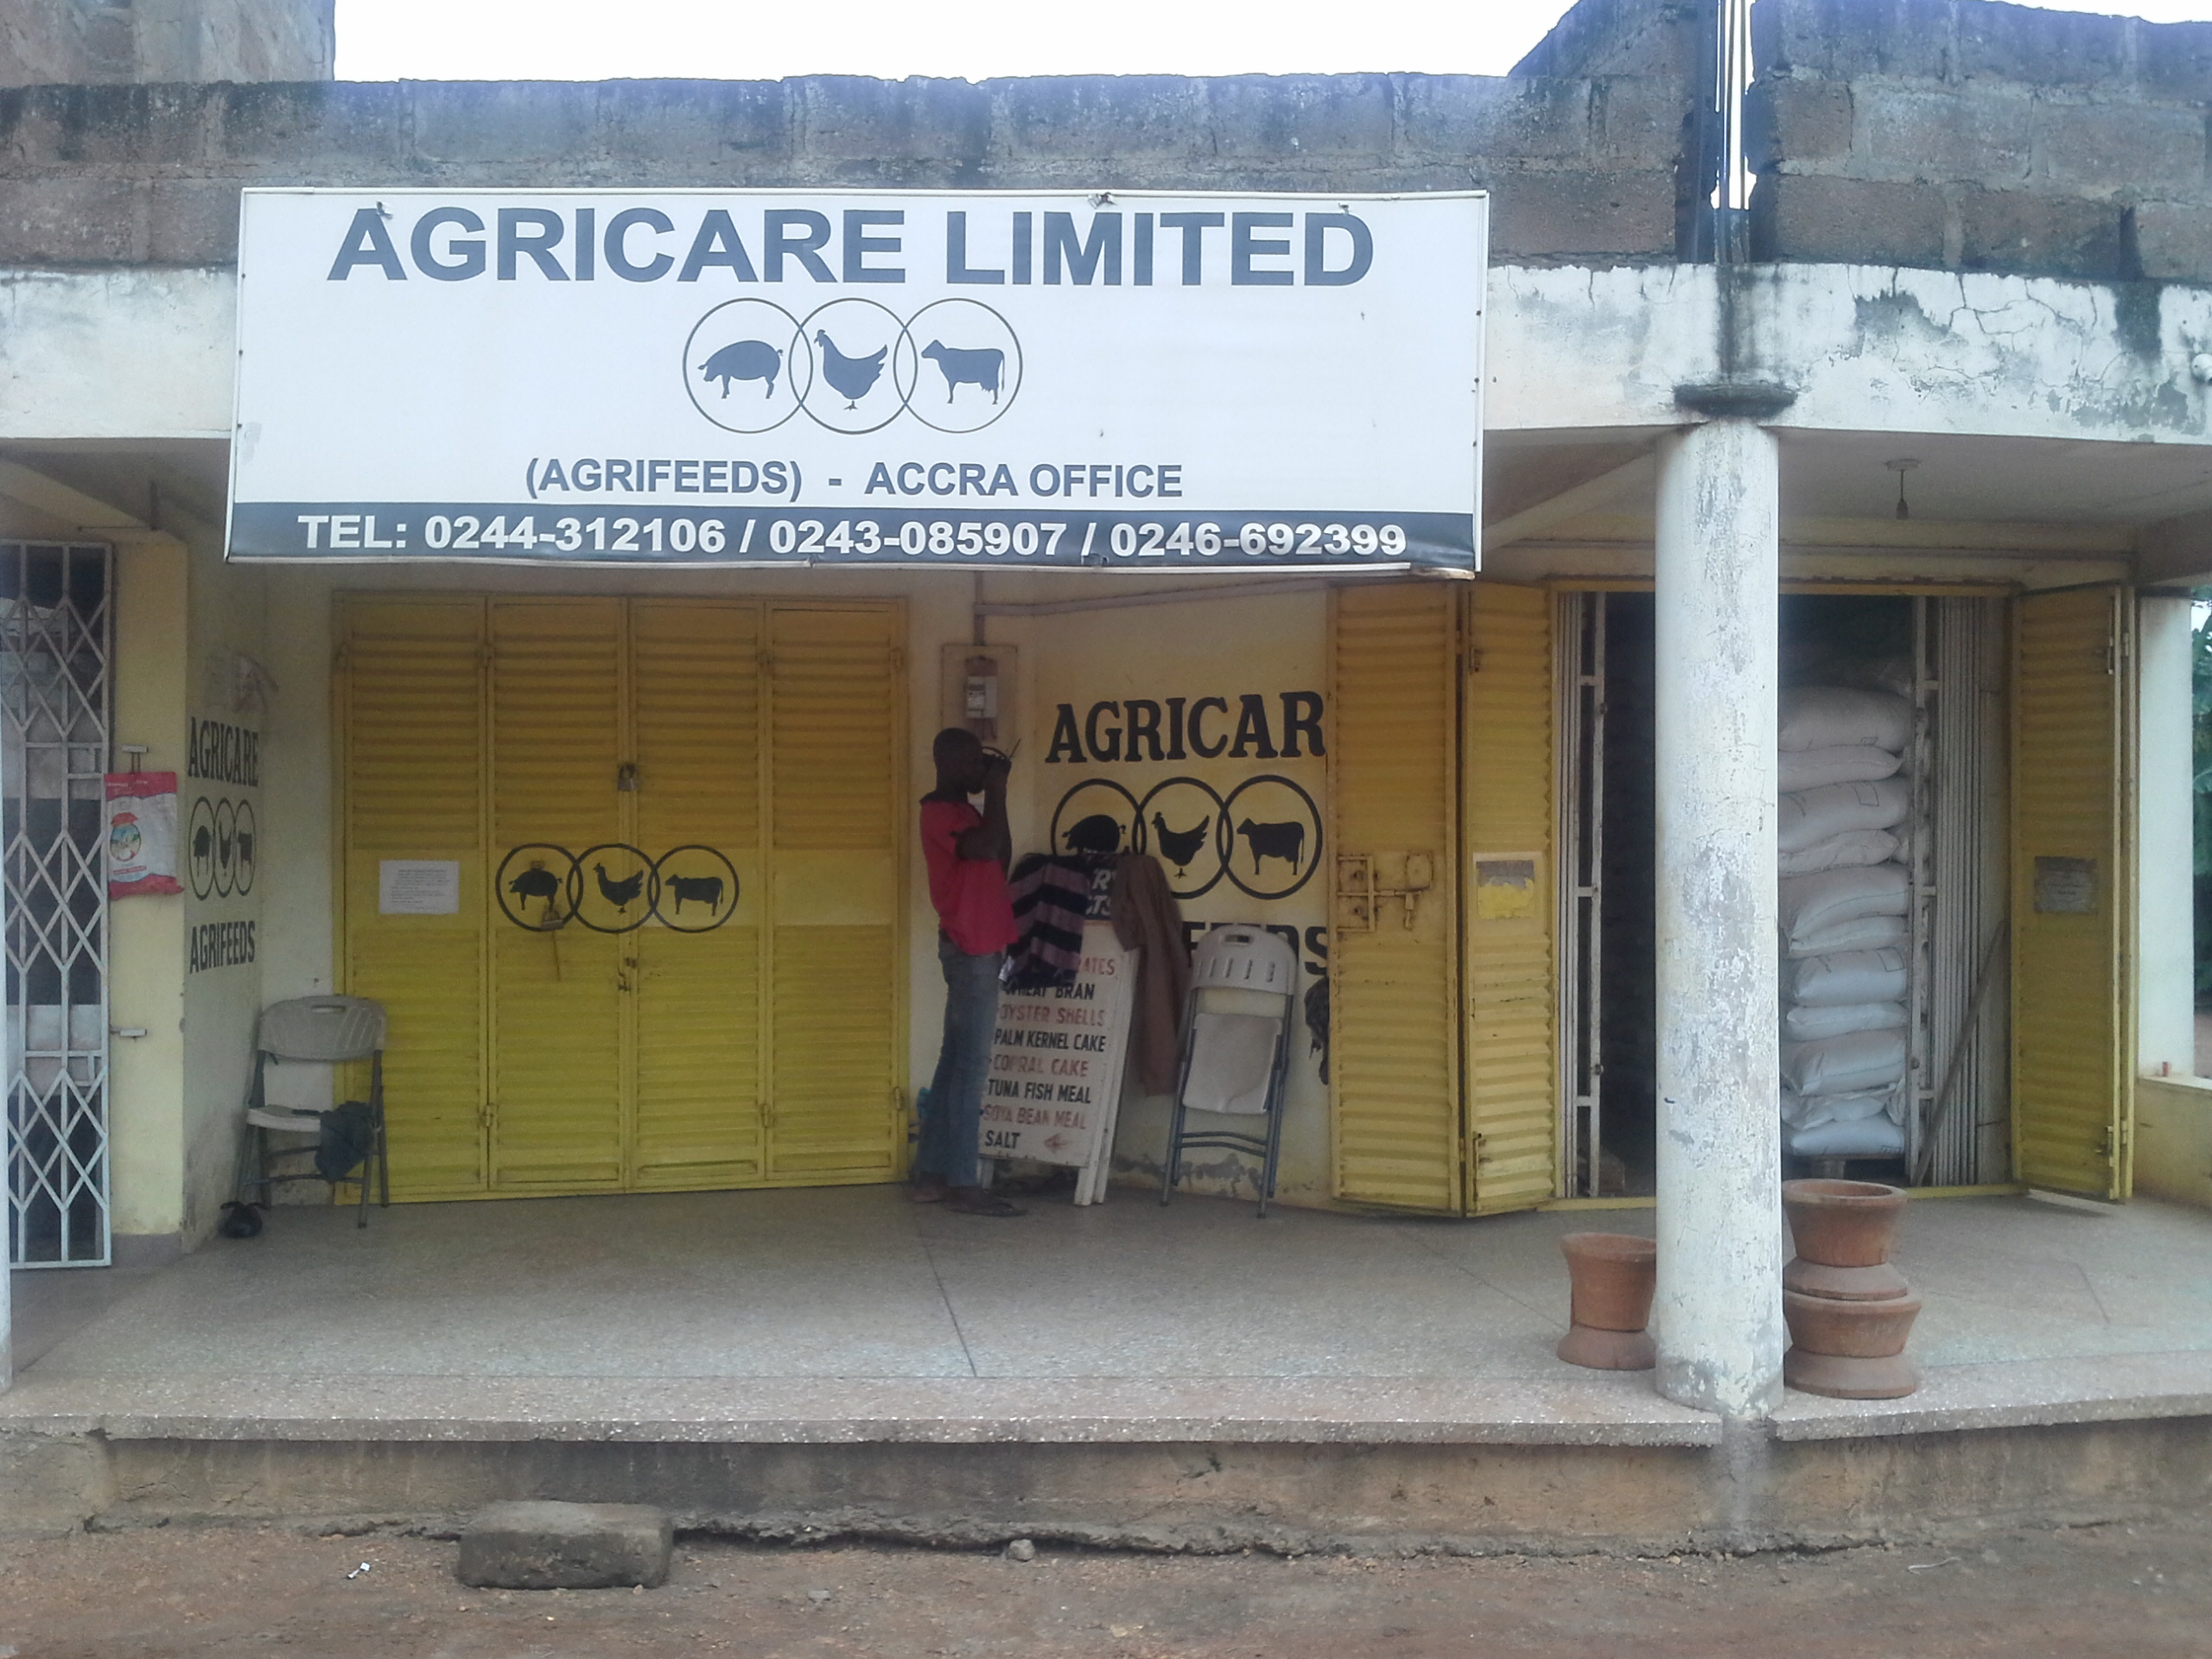 Agricare Limited Office, Ghana. Officials from Agricare told Efua Okai that while they are not putting pig feed on the shelves, they are interacting with the pig farmers, and are always ready to respond to their specific needs.